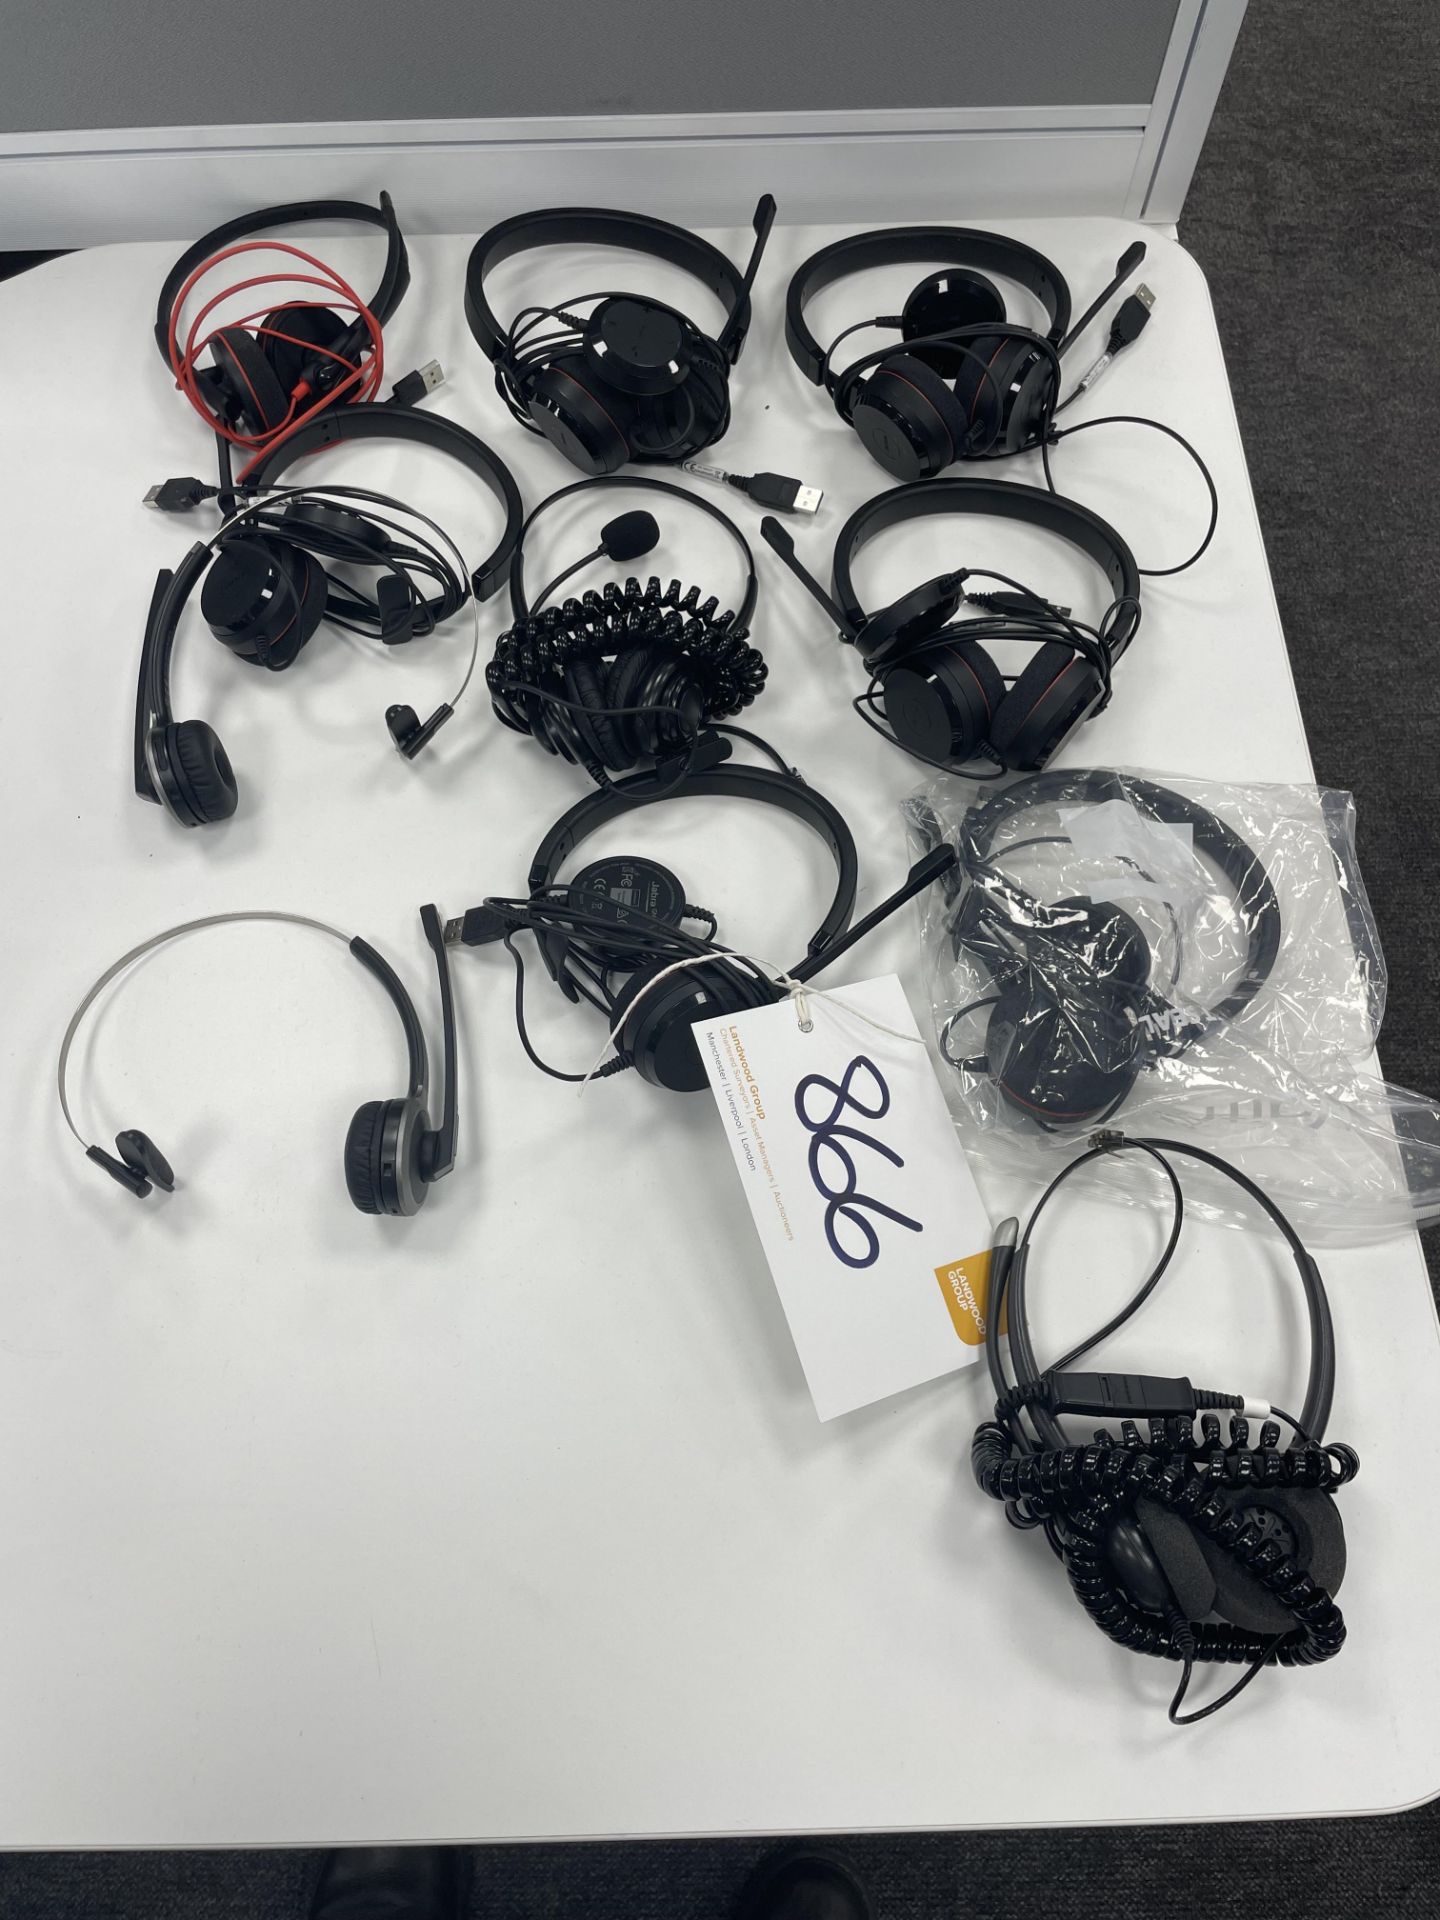 11 assorted USB headsets.